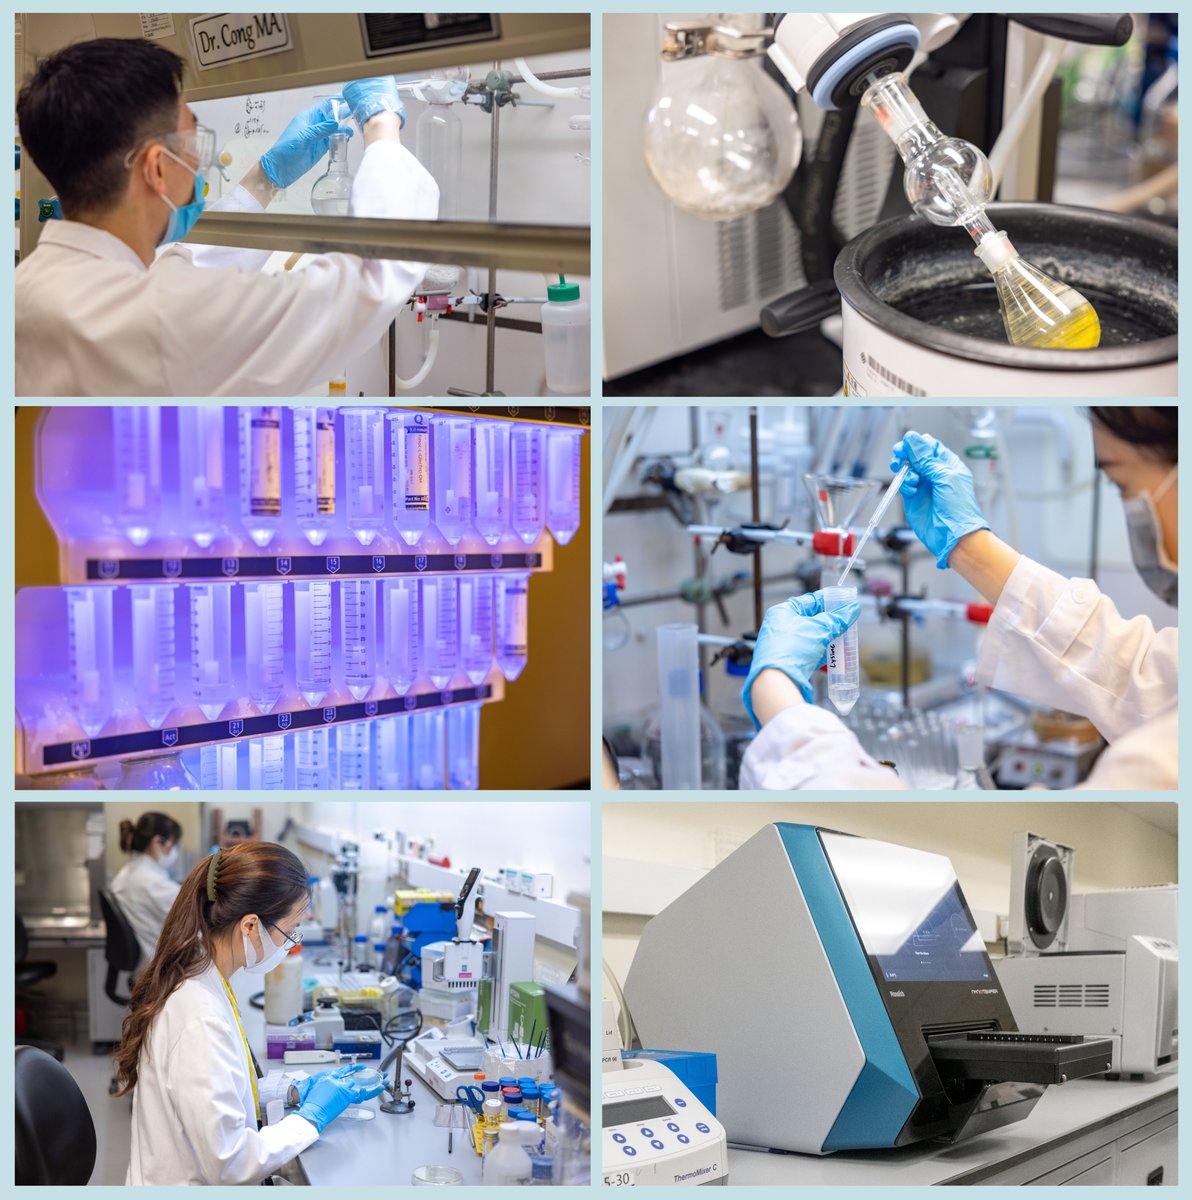 Multi-site, multi-disciplinary #collaboration in action! 🤝 First-ever glimpse into our daily lab life, with our brilliant colleagues hard at work on our various pipelines. 🔥 Featured here are snapshots from our in-vitro, pre-clinical stages of R&D. 💊